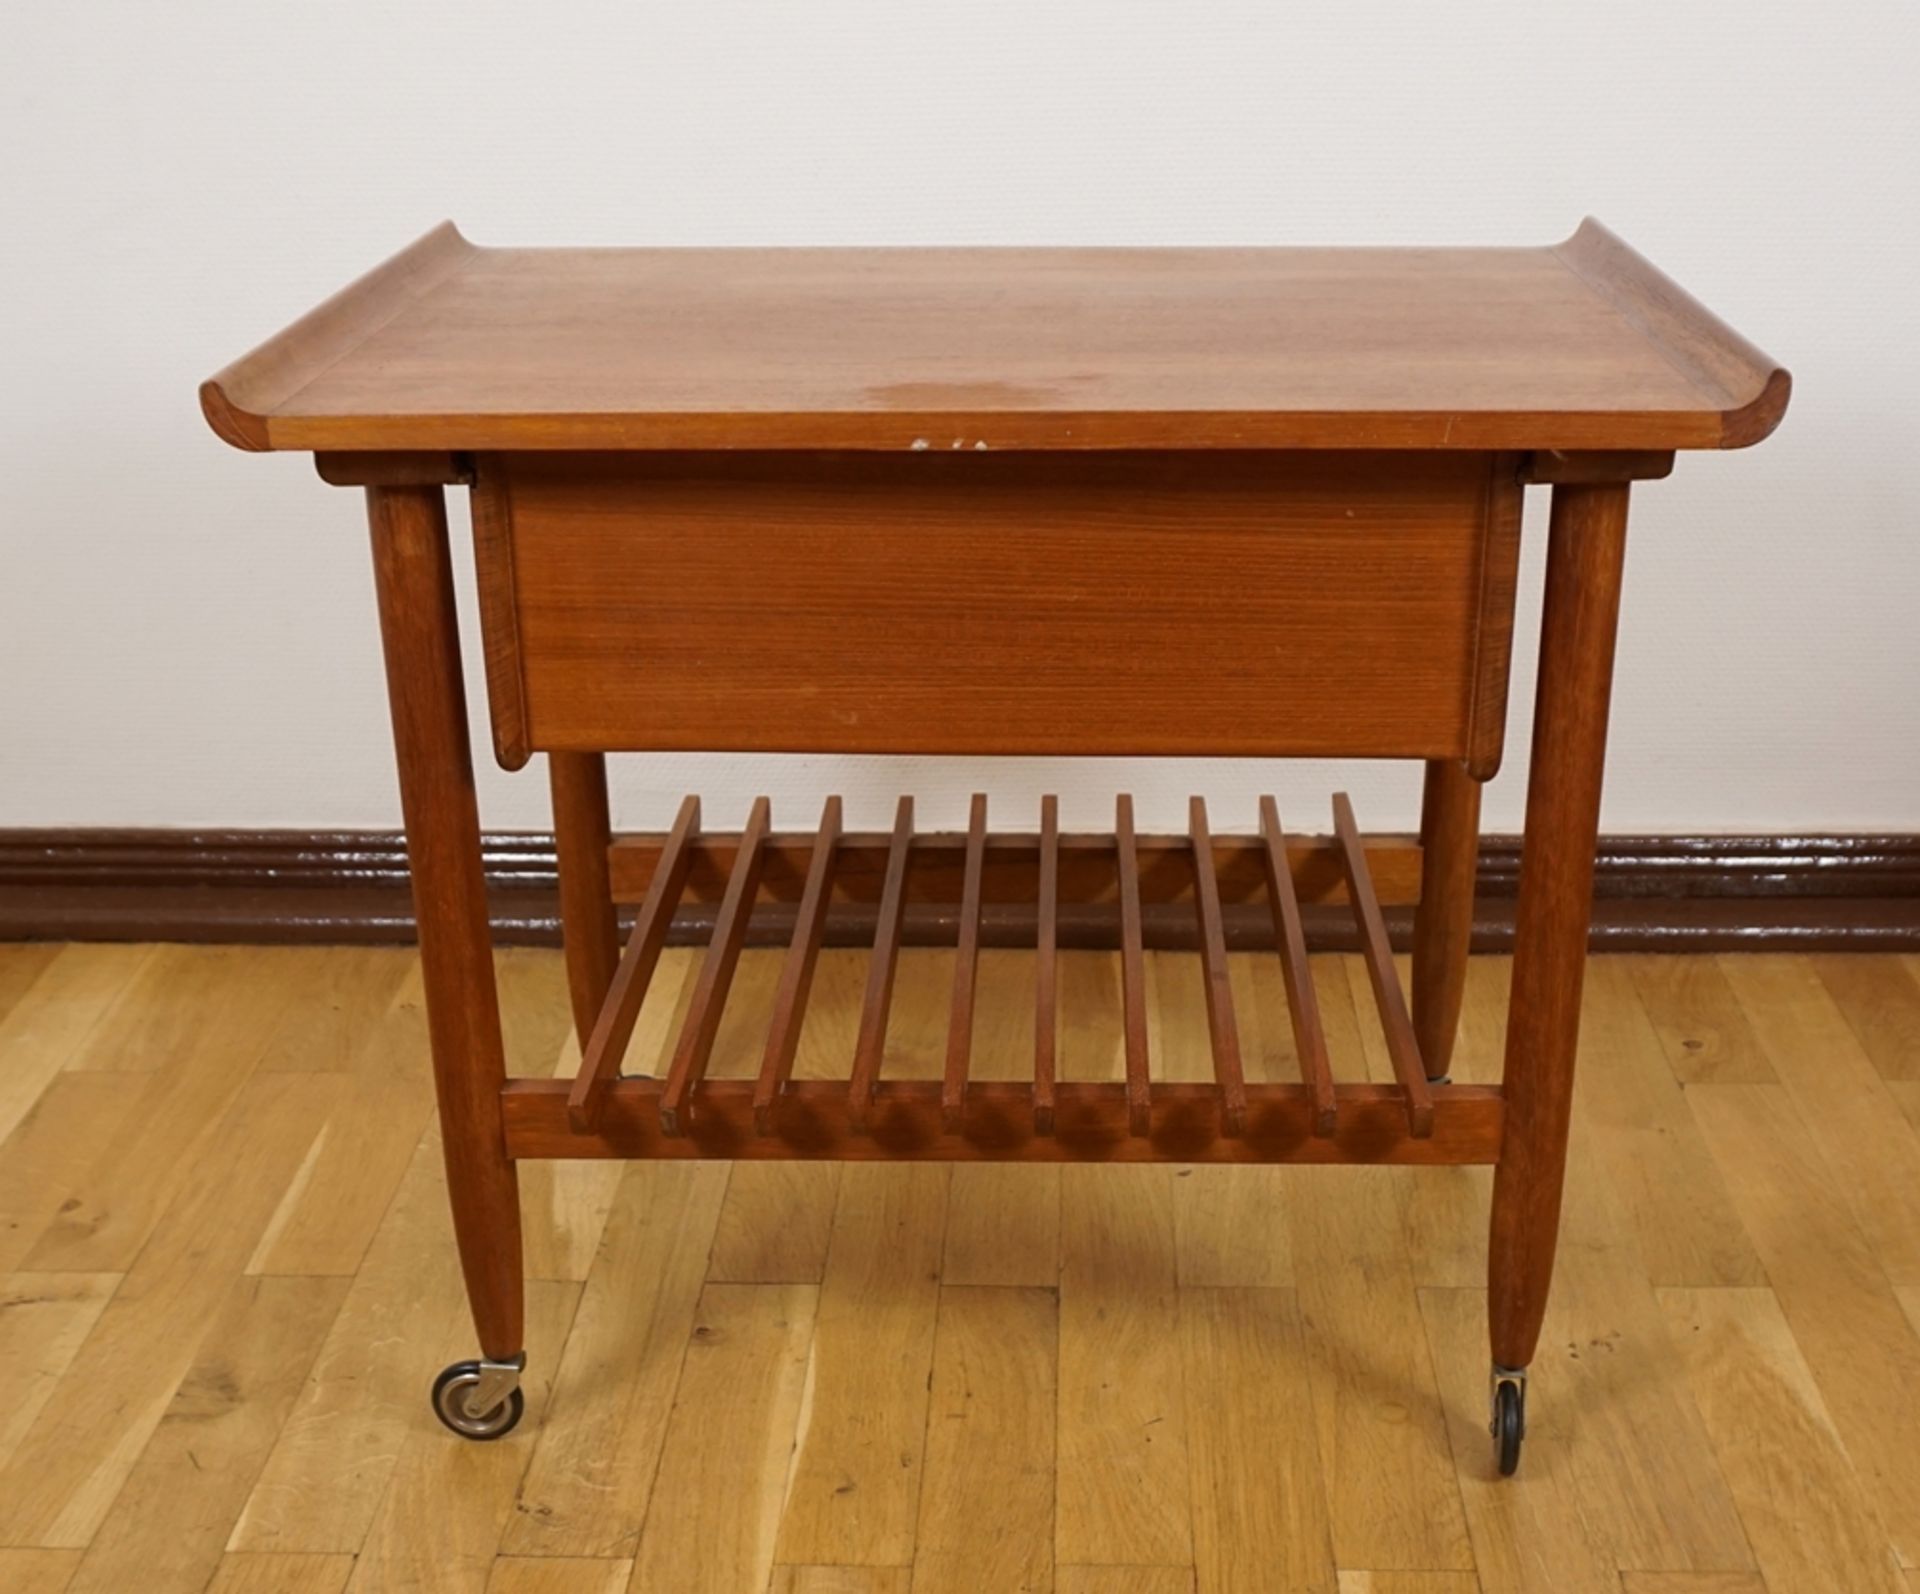 Sewing table with drawer, Denmark, 1960s - Image 4 of 5